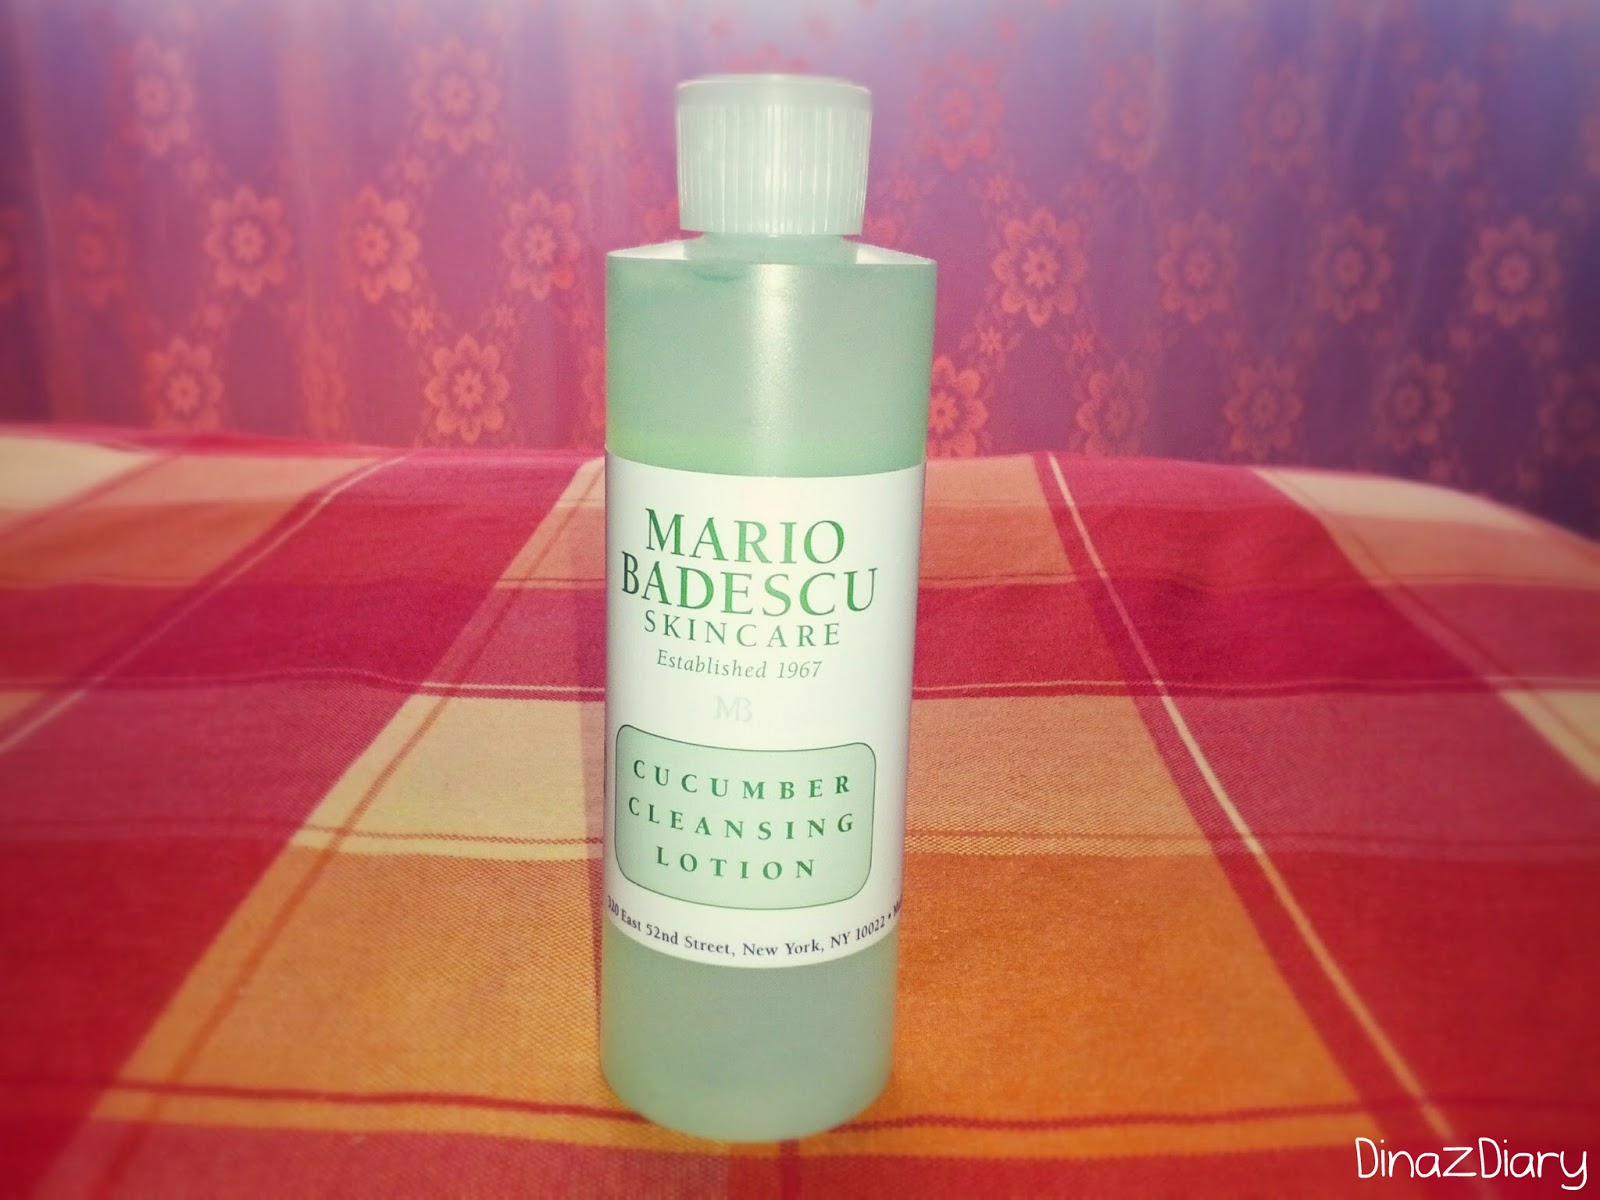 DinazDiary: Mario Badescu Cucumber Cleansing Lotion - Review